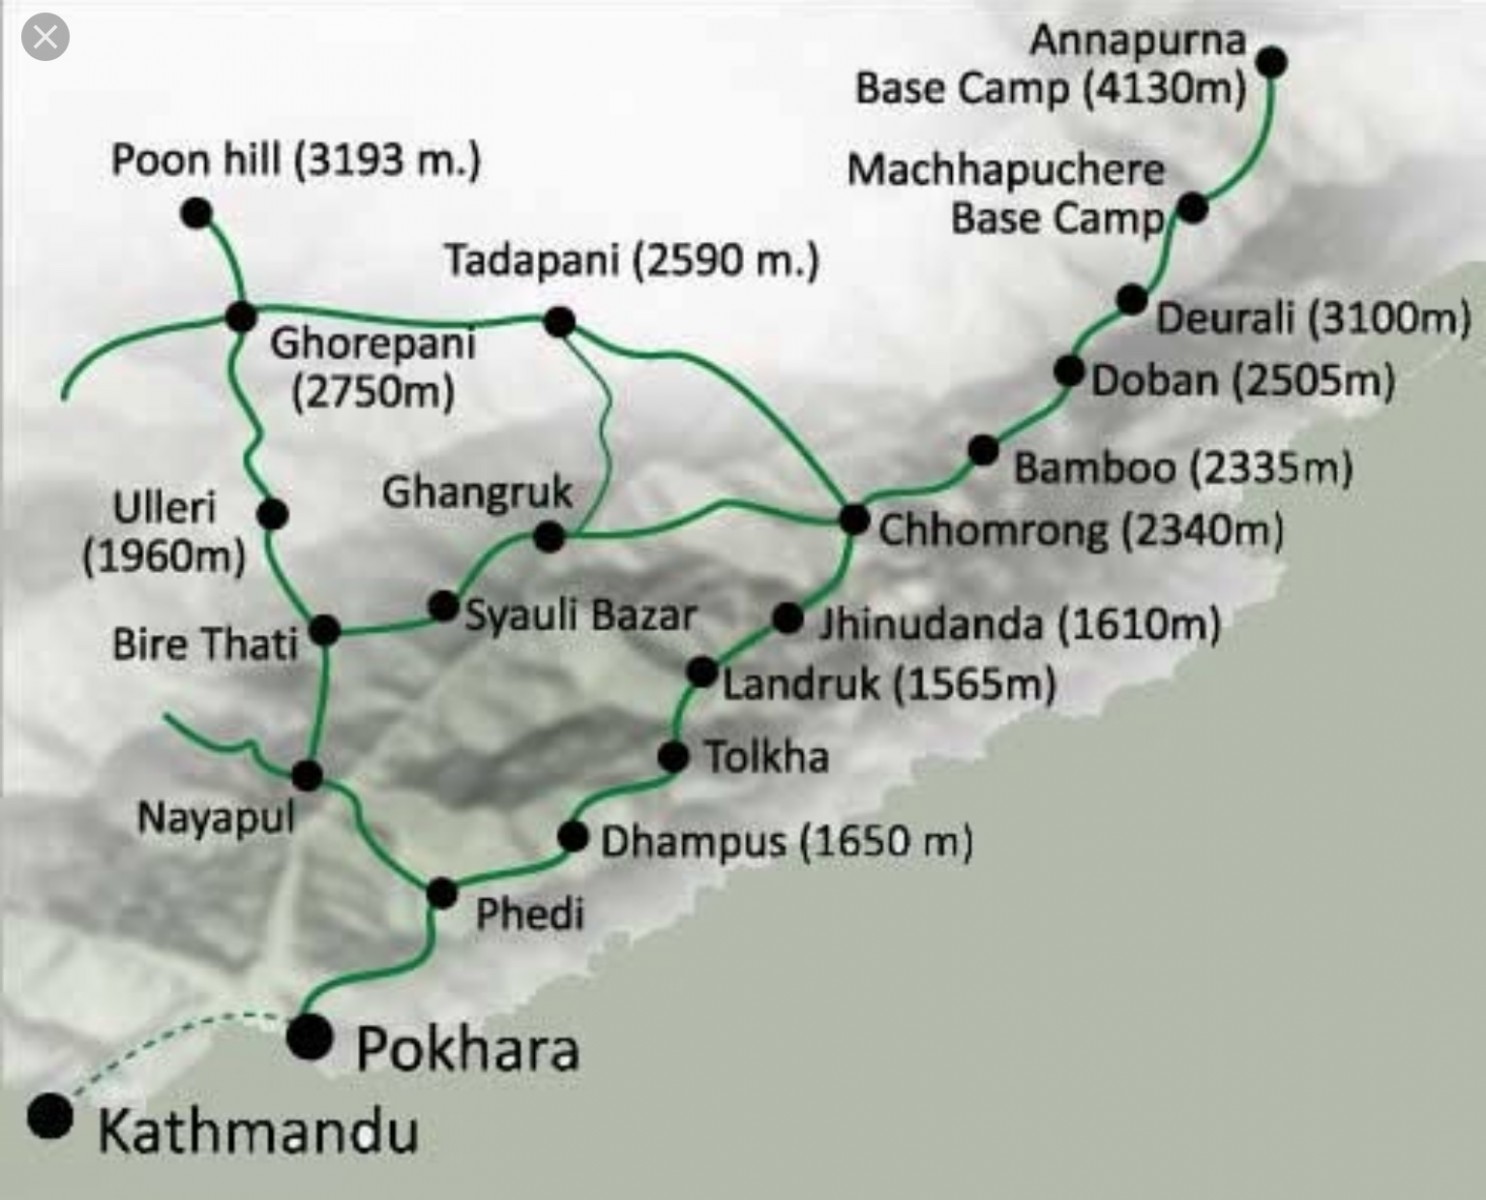 Annapurna Base Camp with Poonhill Trek Map